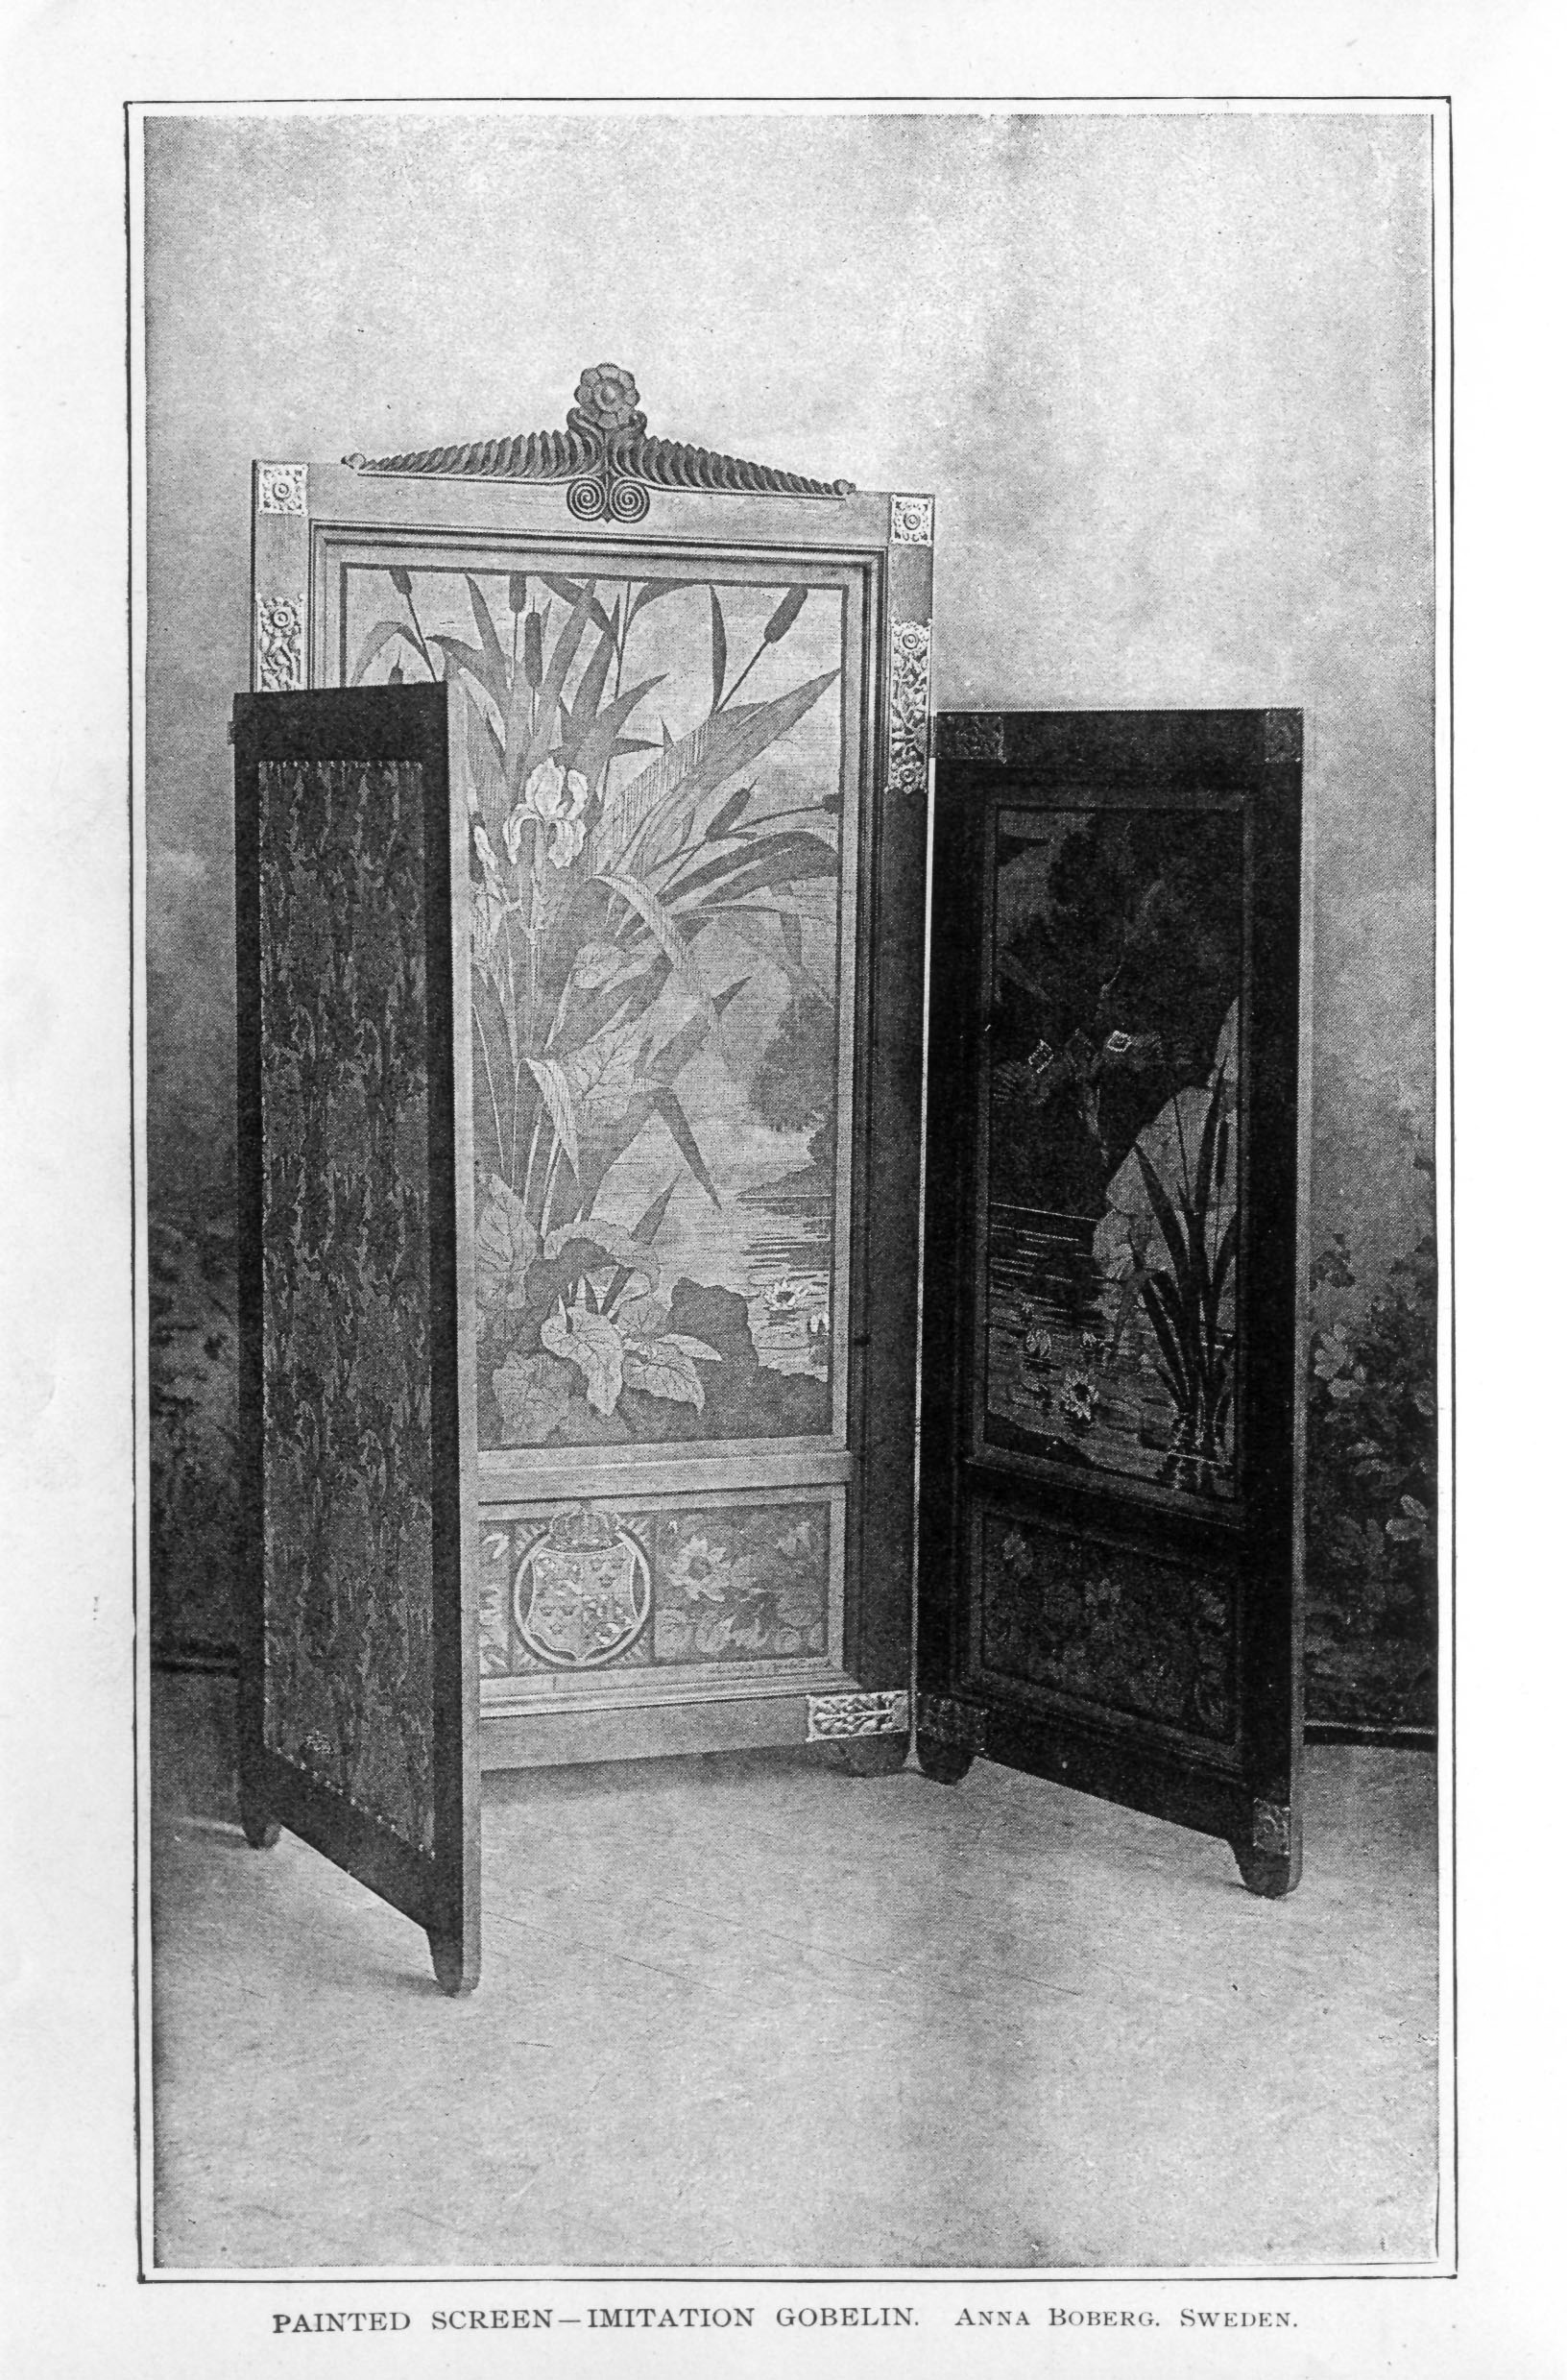 three panel screen painted with water scene including reeds and lilies